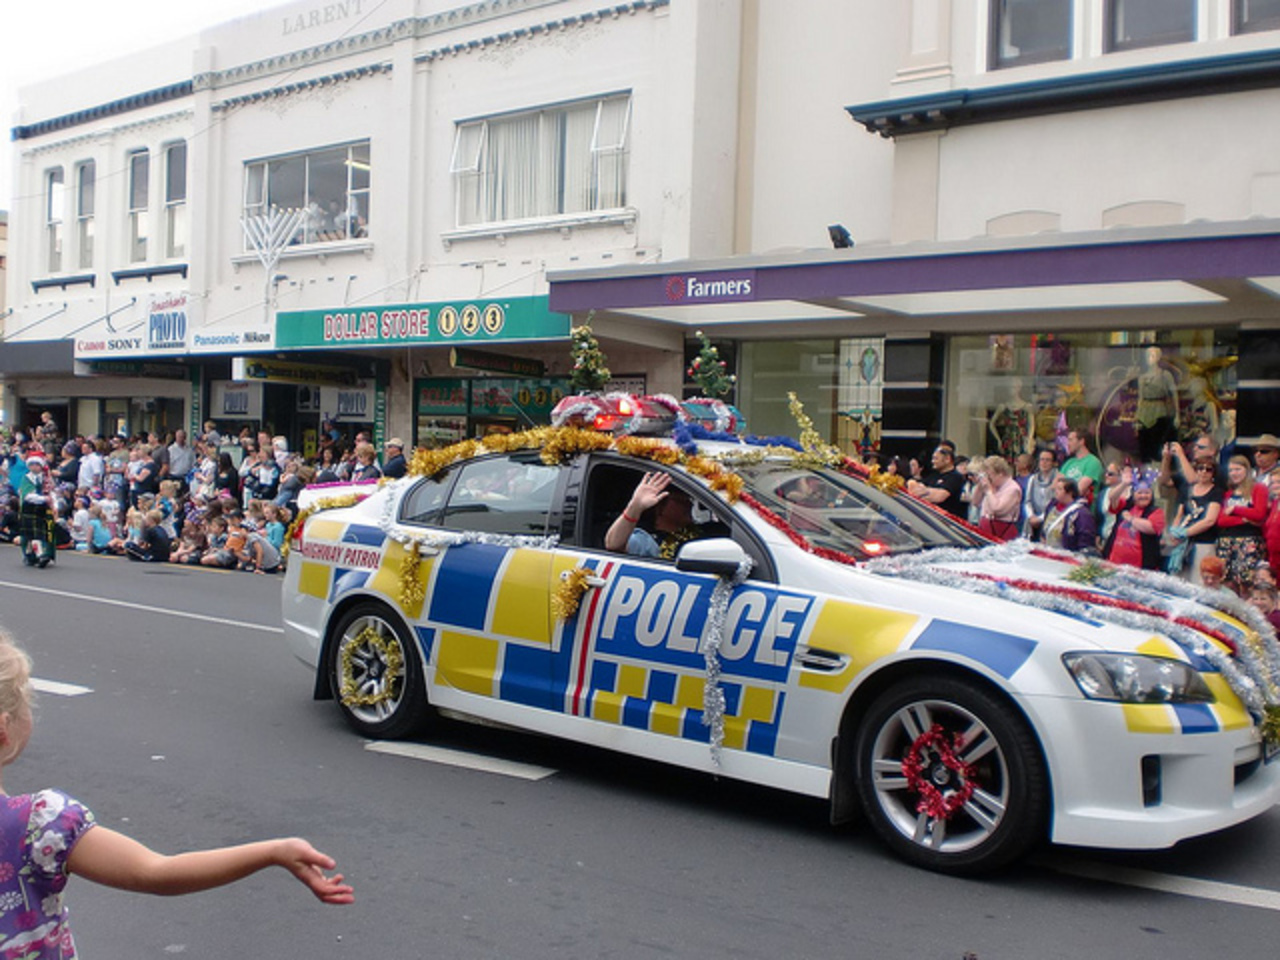 Holden Commodore SV6 Police Car | Flickr - Photo Sharing!